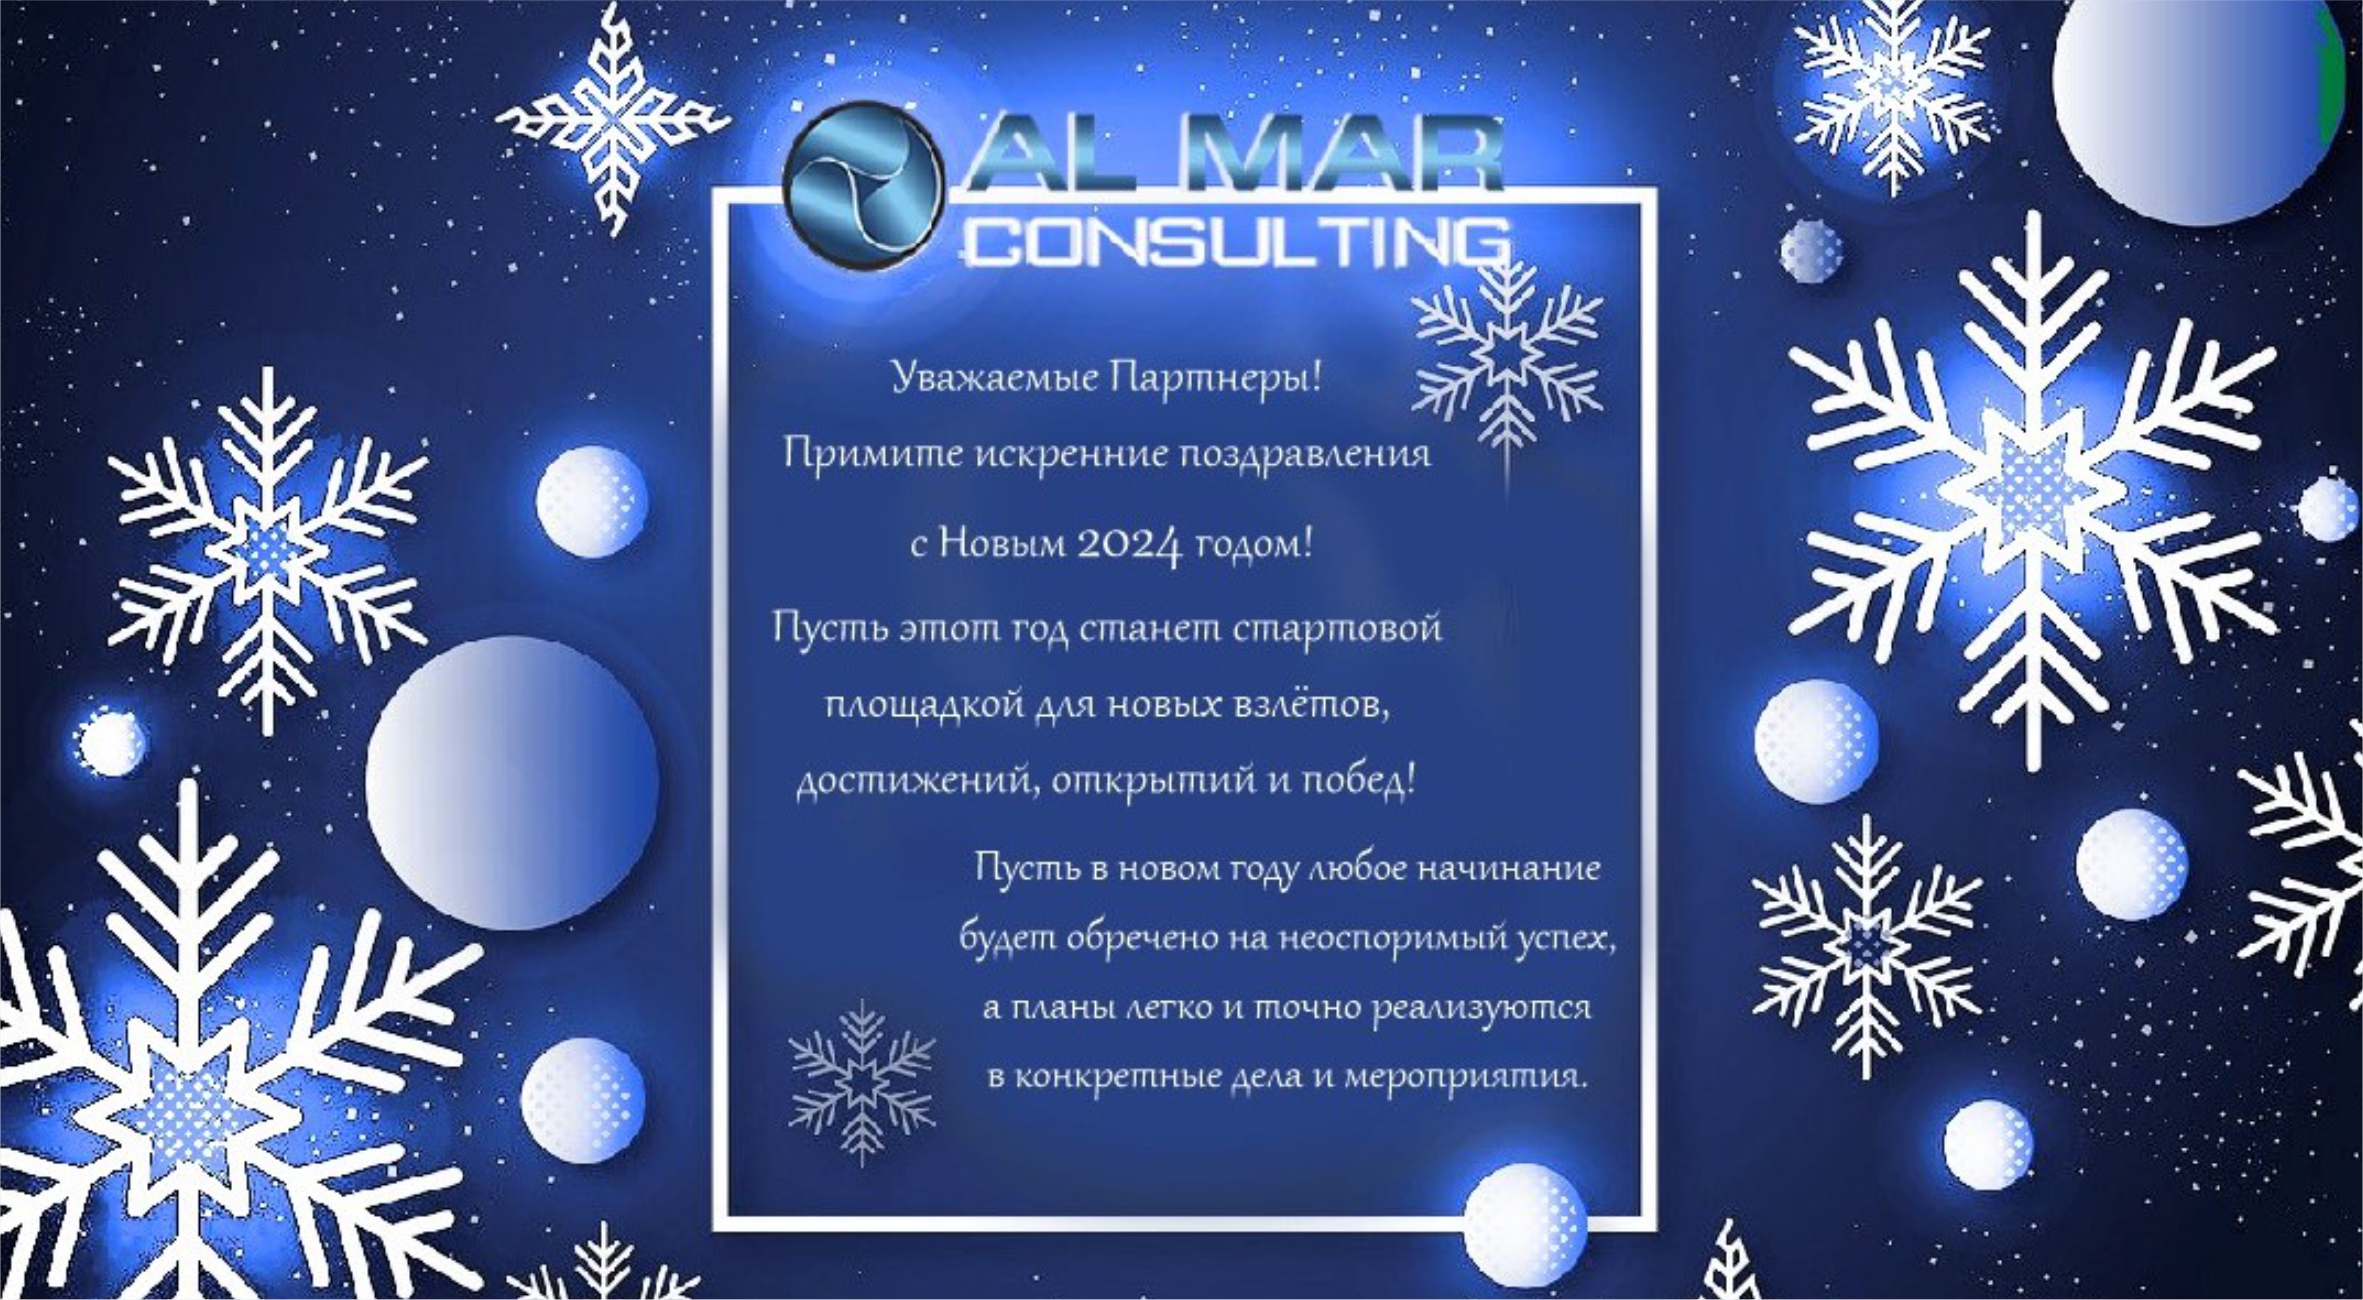 The AL MAR CONSULTING  wishes a Happy New Year!